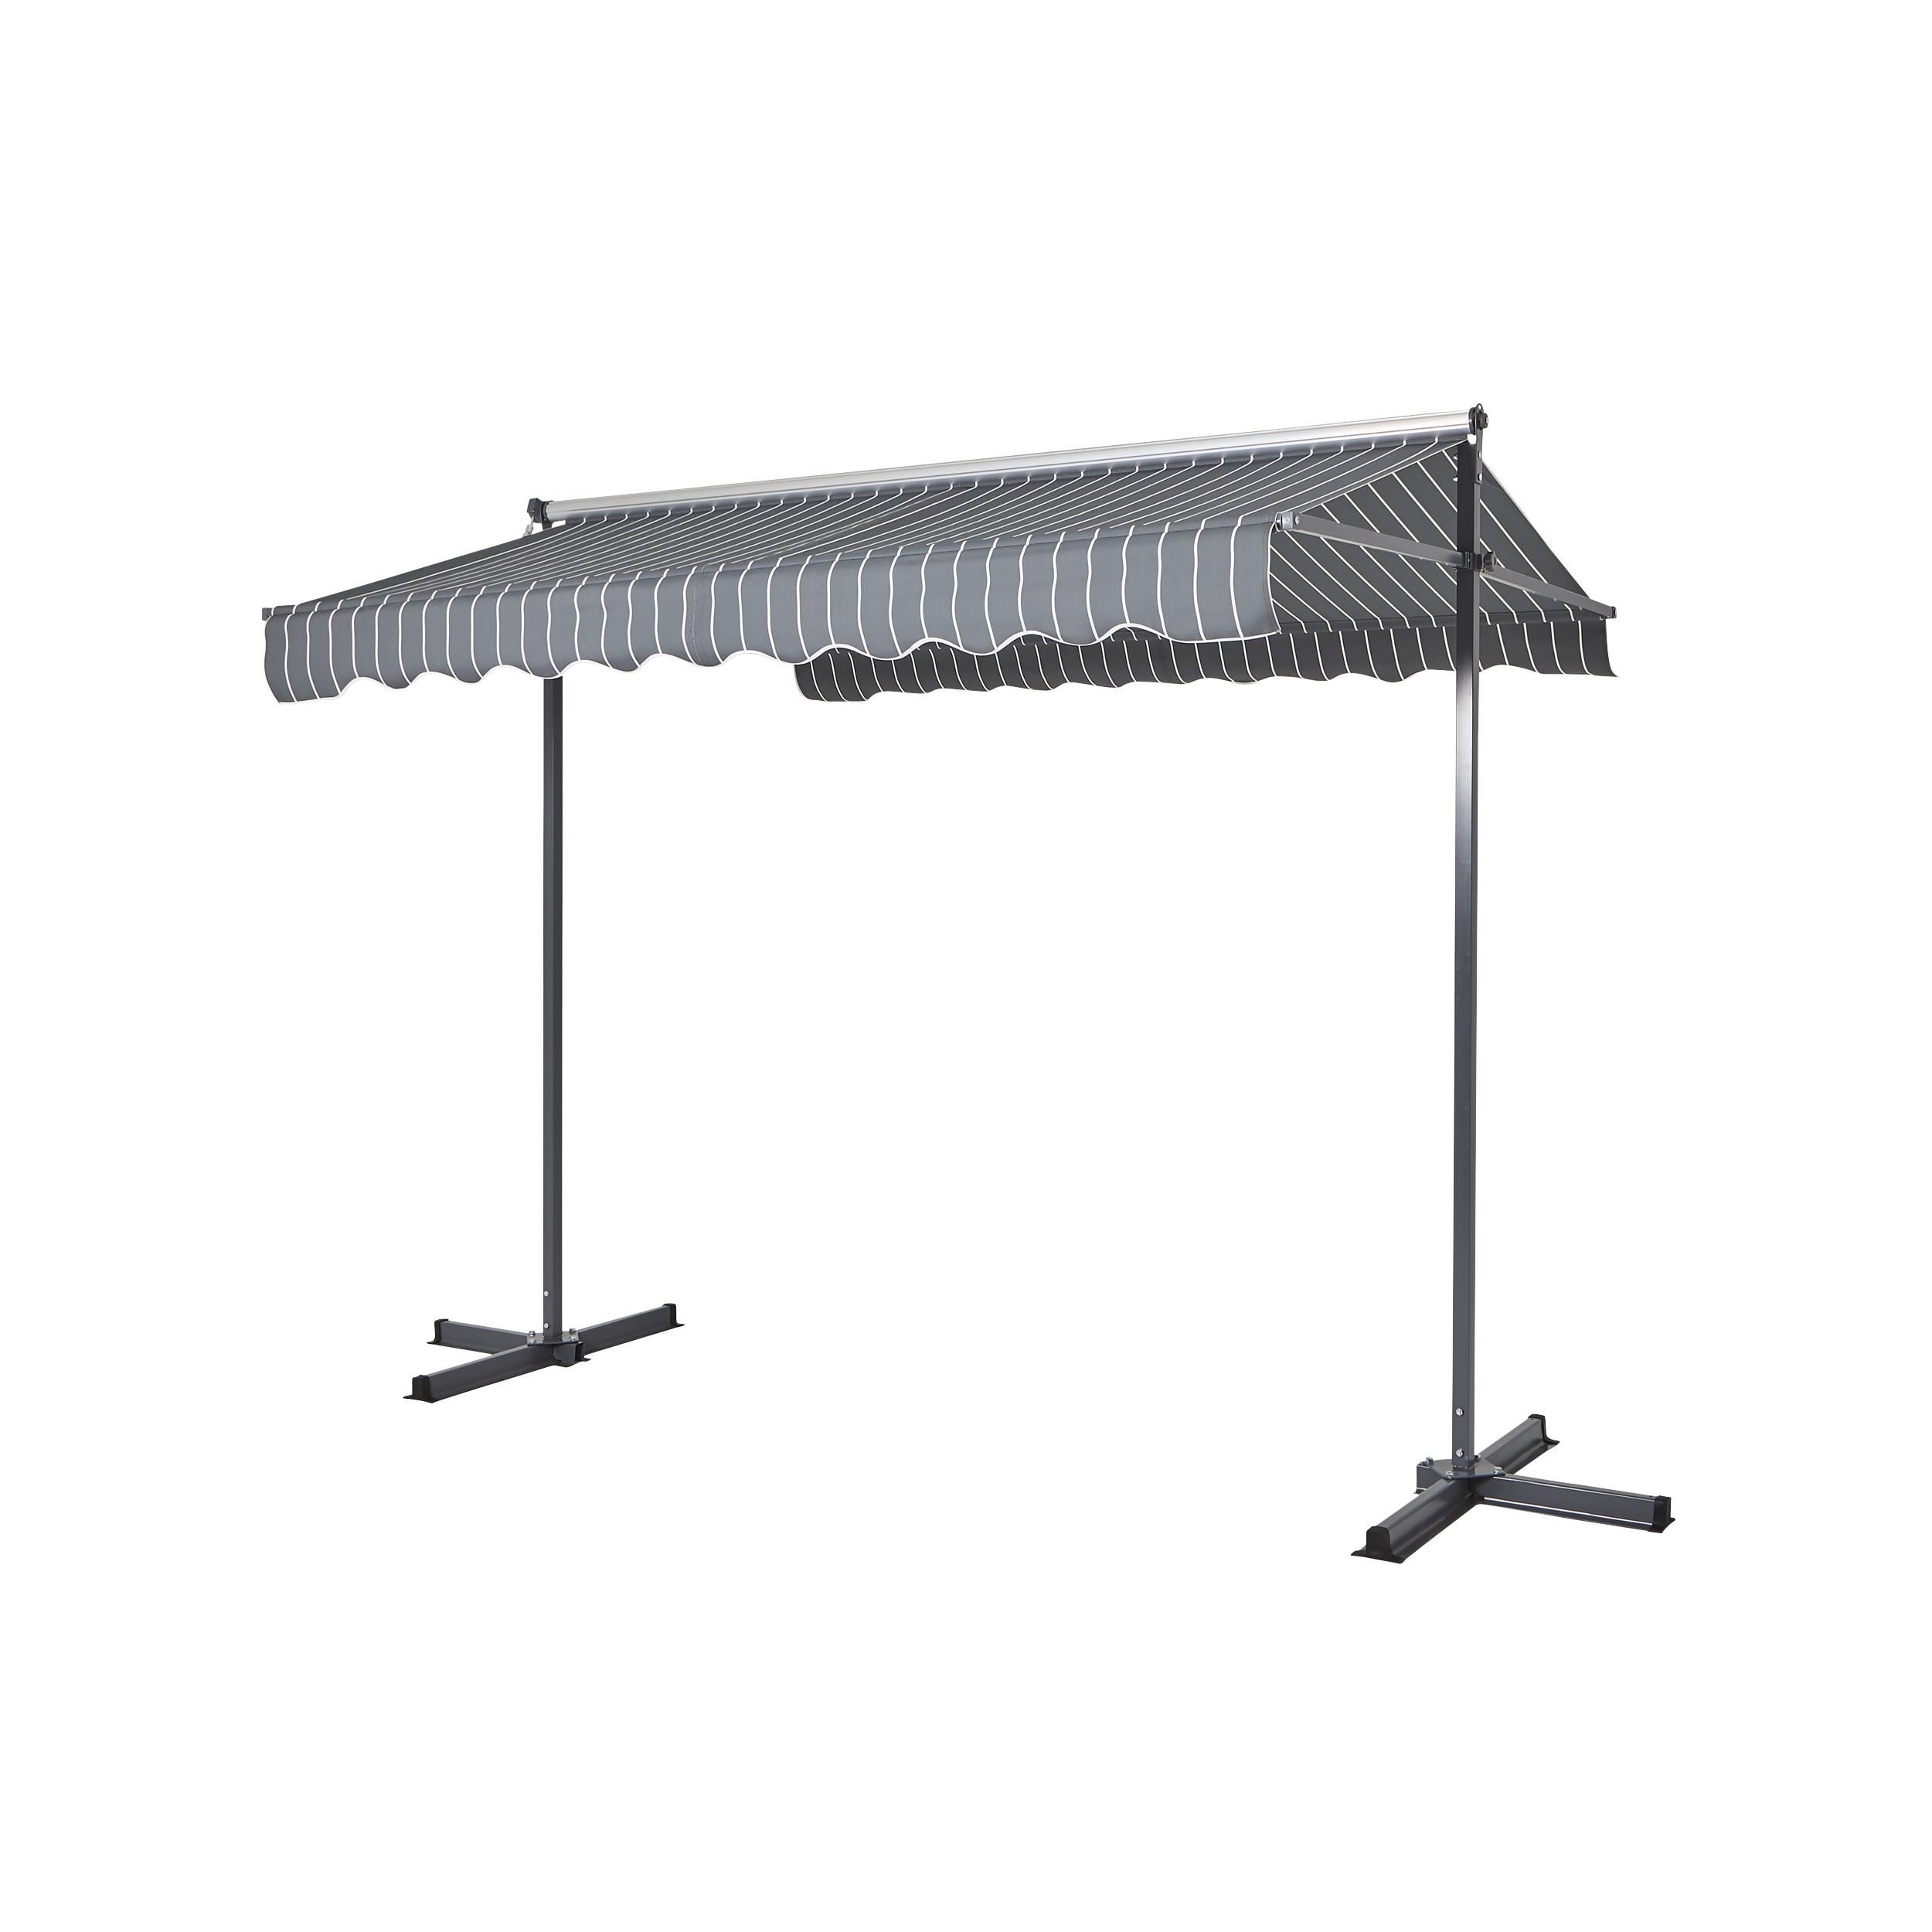 Blooma Dark Grey & White Retractable Awning, (L)3.95M (W)3M